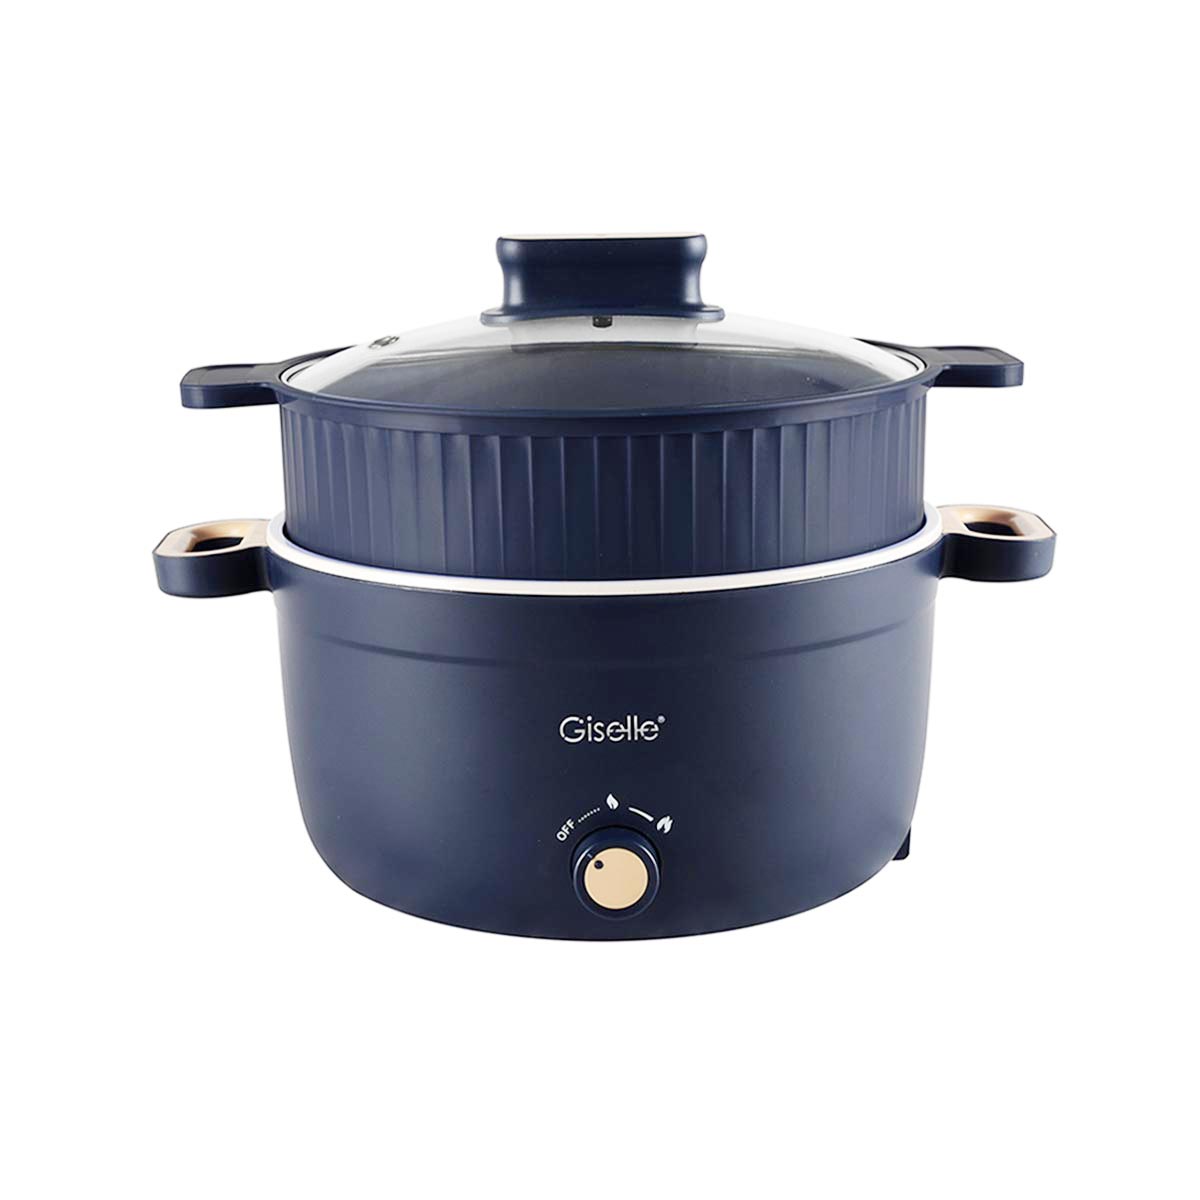 Giselle Multi-function 4L Electric Cooker with ceramic inner pot [KEA0325]